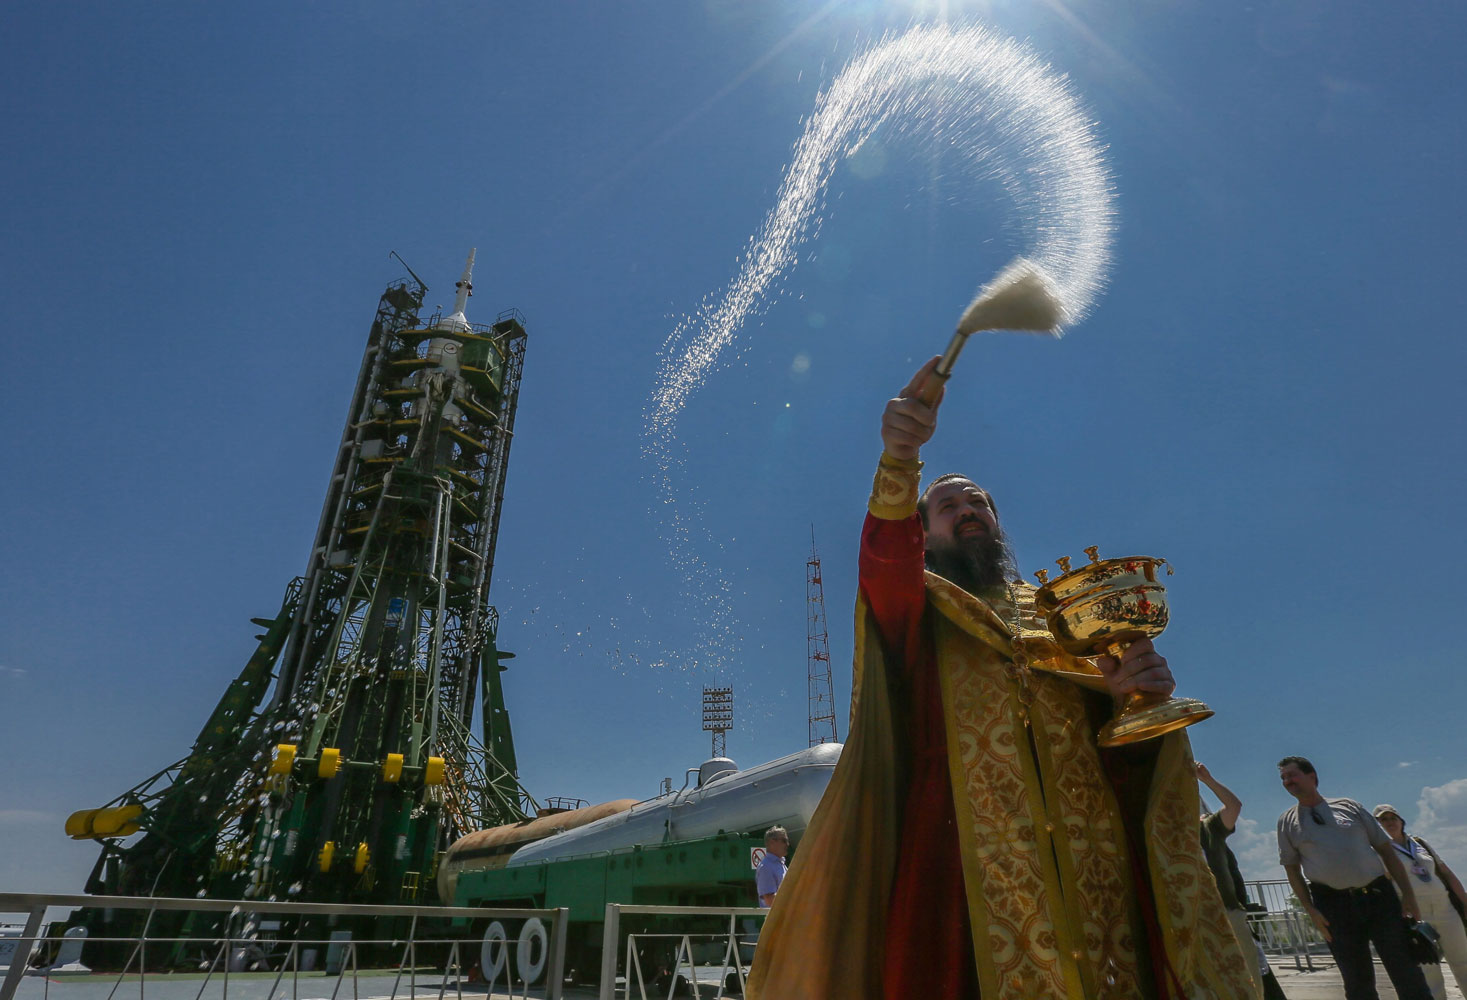 An Orthodox priest blesses the Russian Soyuz TMA-13M rocket booster on the launch pad at the Baikonur Cosmodrome, Kazakhstan, on May 27, 2014.